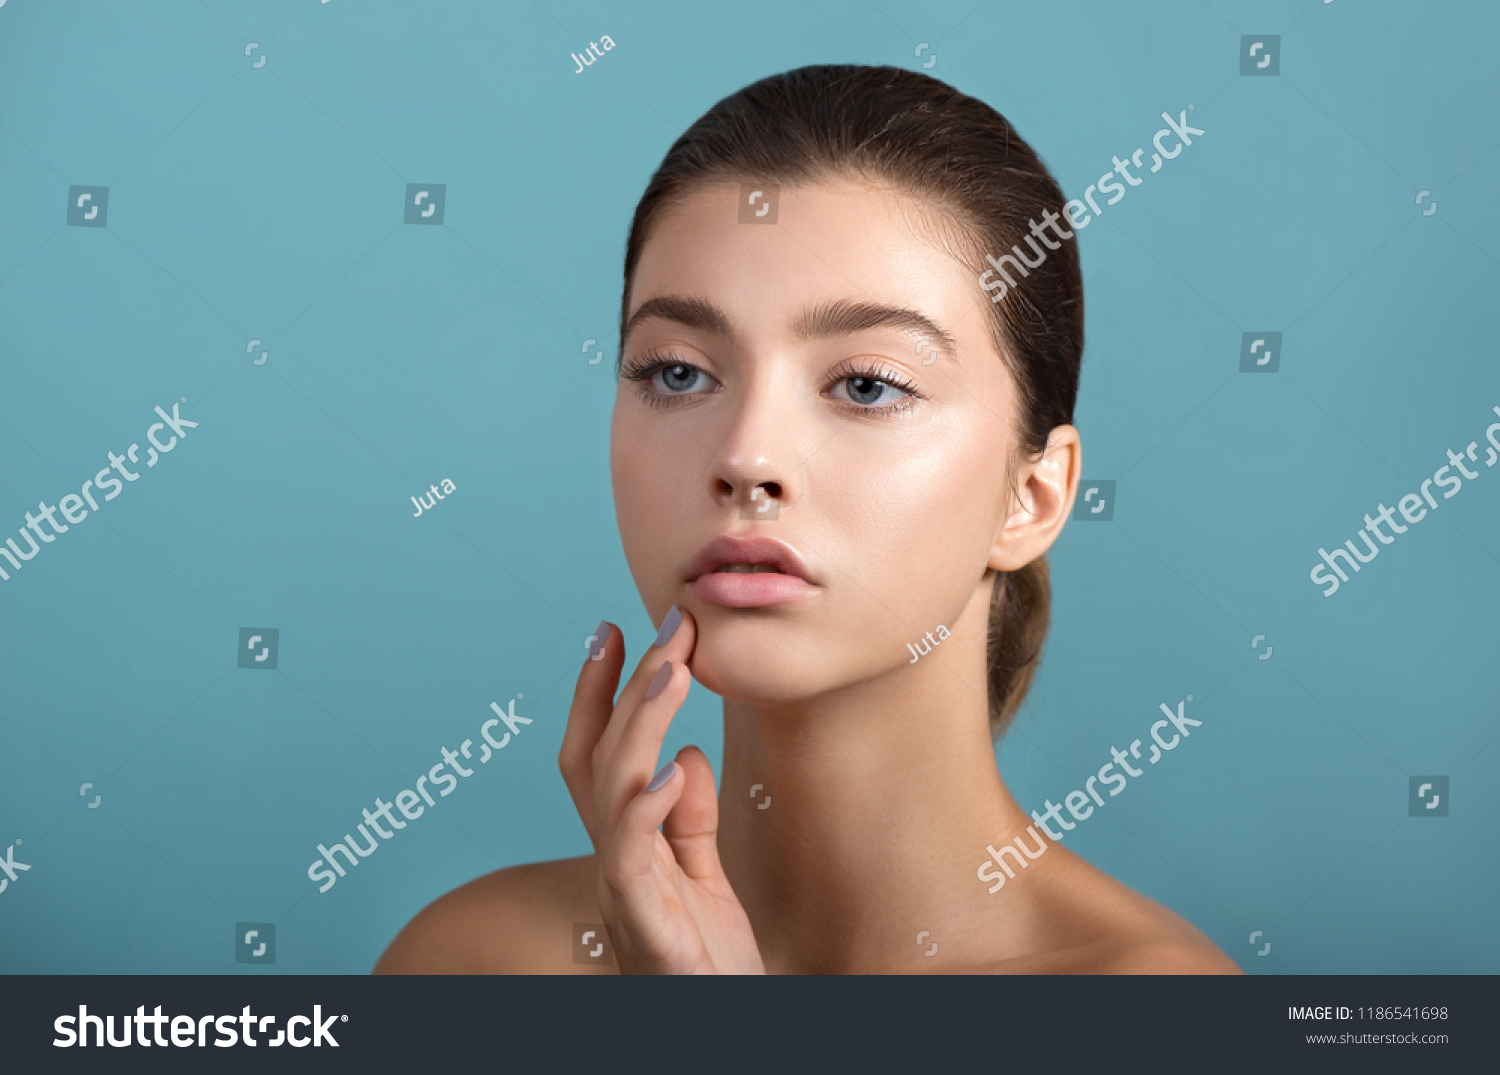 Beautiful young  woman with fresh clean perfect skin. Portrait of beauty model with natural make up and and hand with manicure touching face. Spa, skincare and wellness. #1186541698